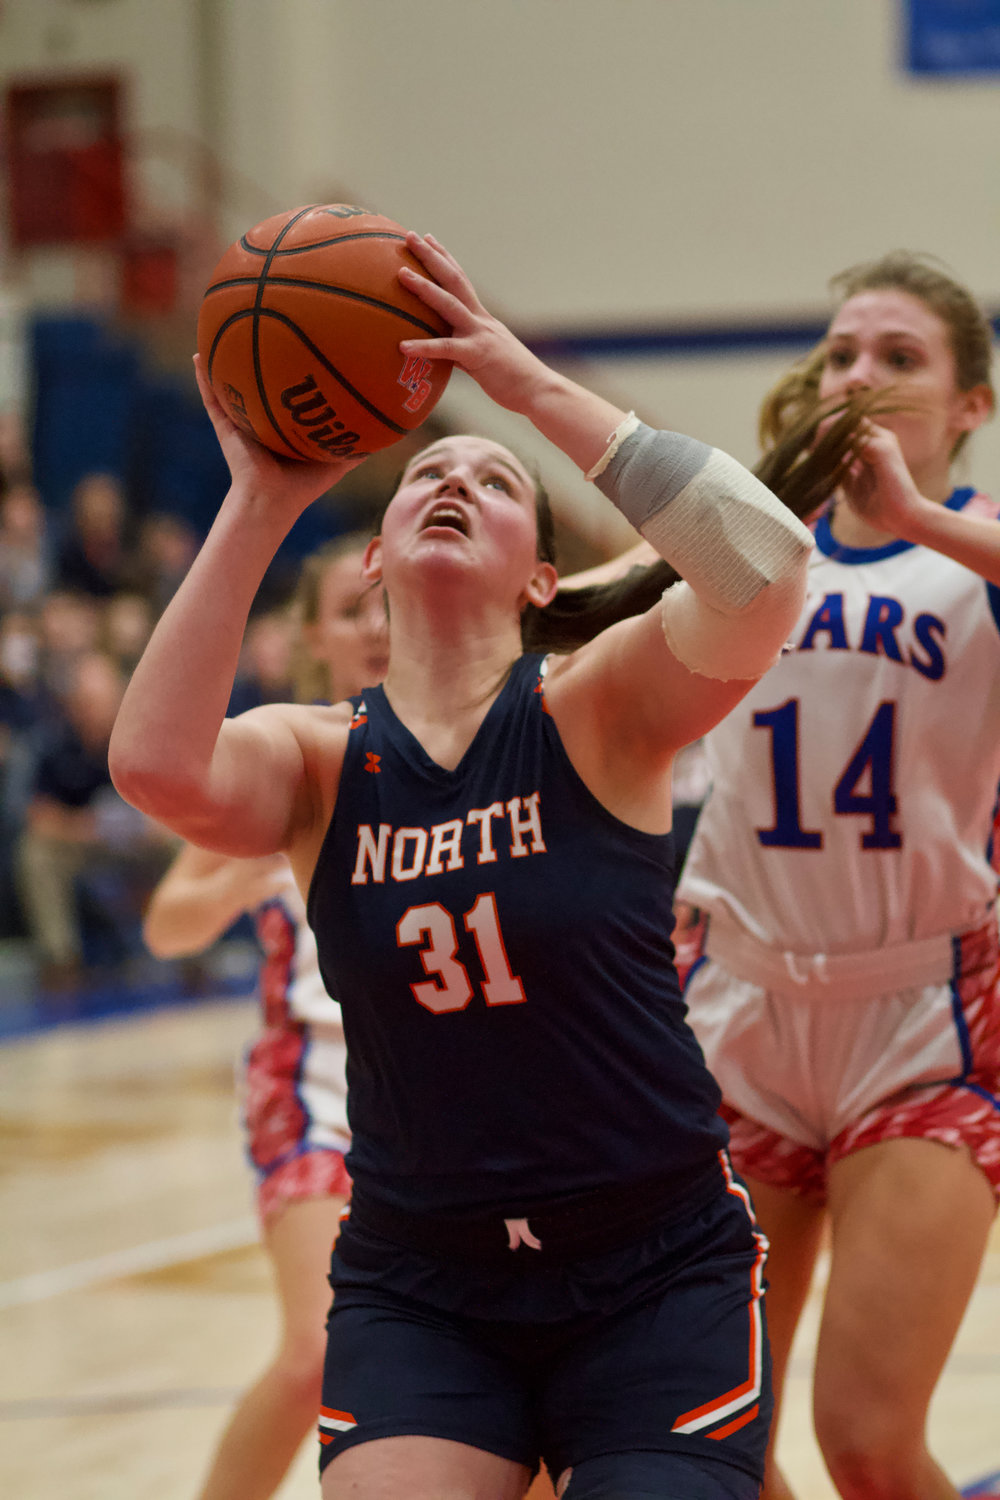 Katie Rice led the Chargers with 14 pts and 12 rebs in their 42-28 loss to Western Boone.